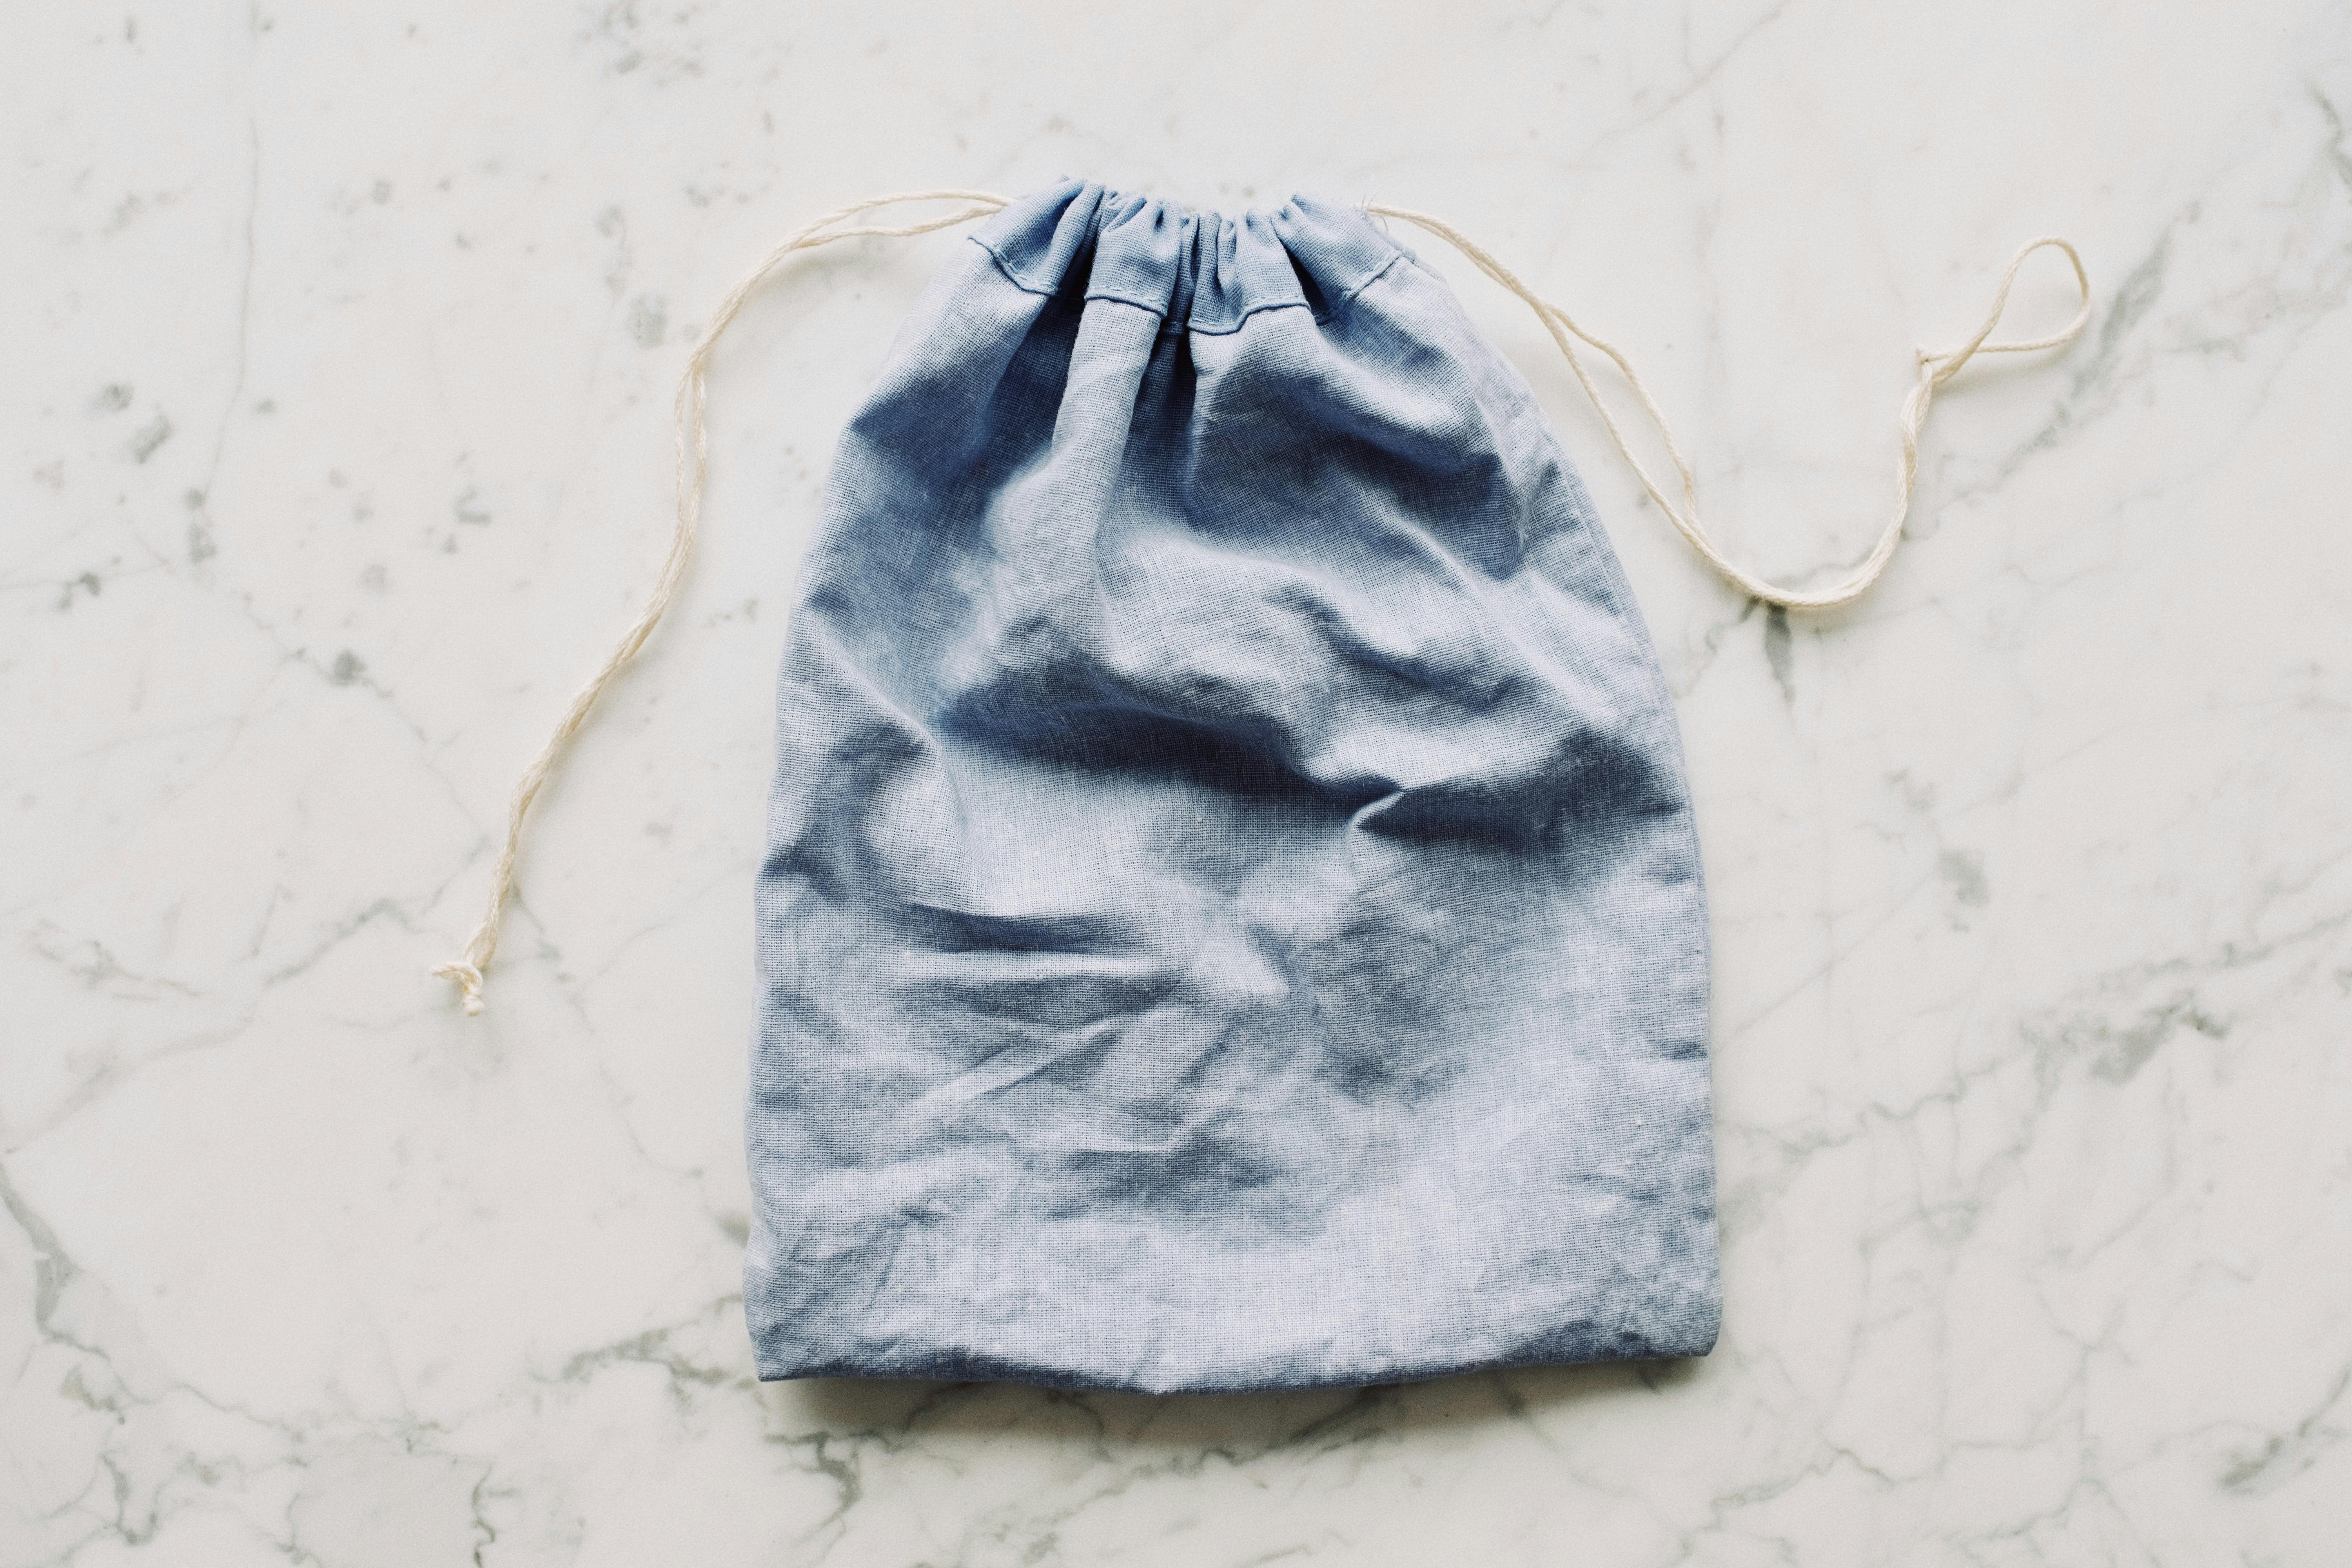 Blue textile bag placed on marble table · Free Stock Photo